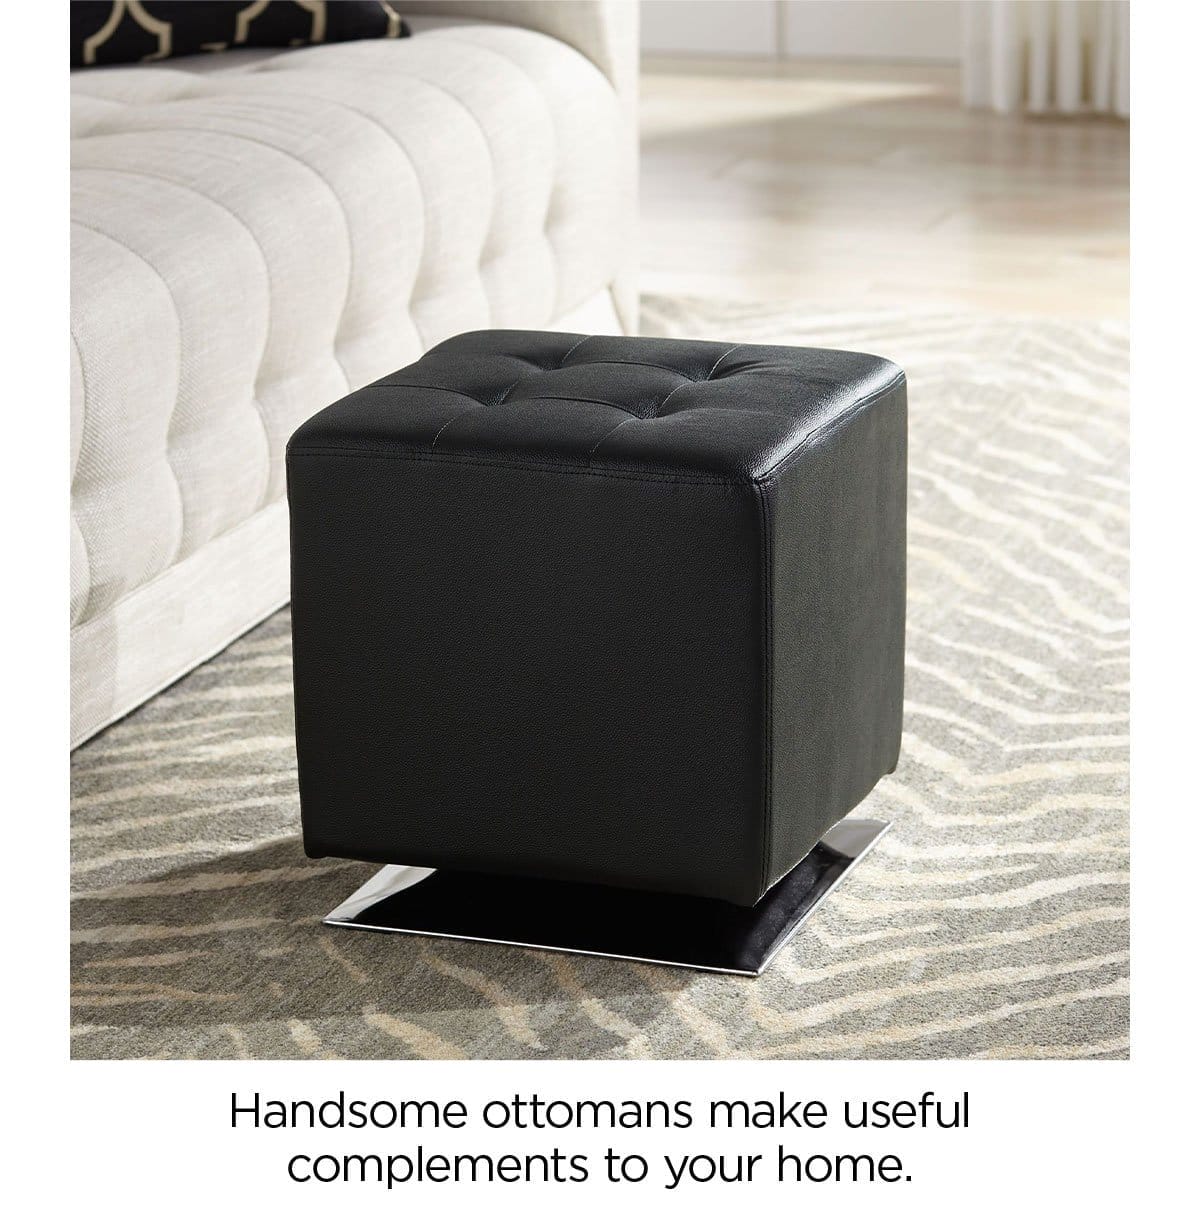 Handsome ottomans make useful complements to your home.